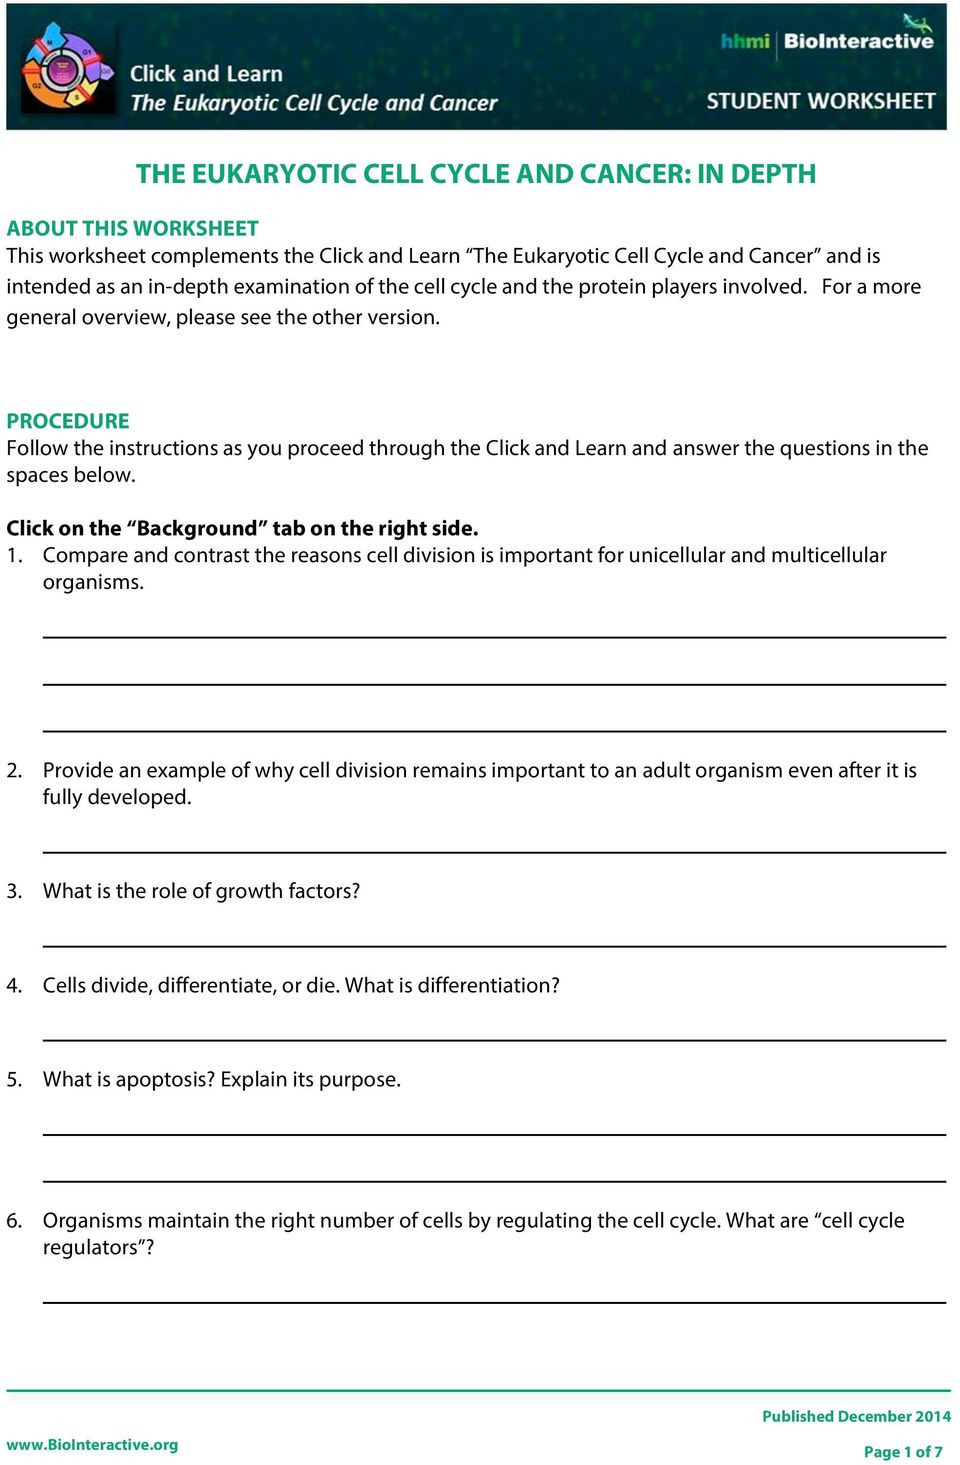 cell-cycle-and-cancer-worksheet-answers-db-excel